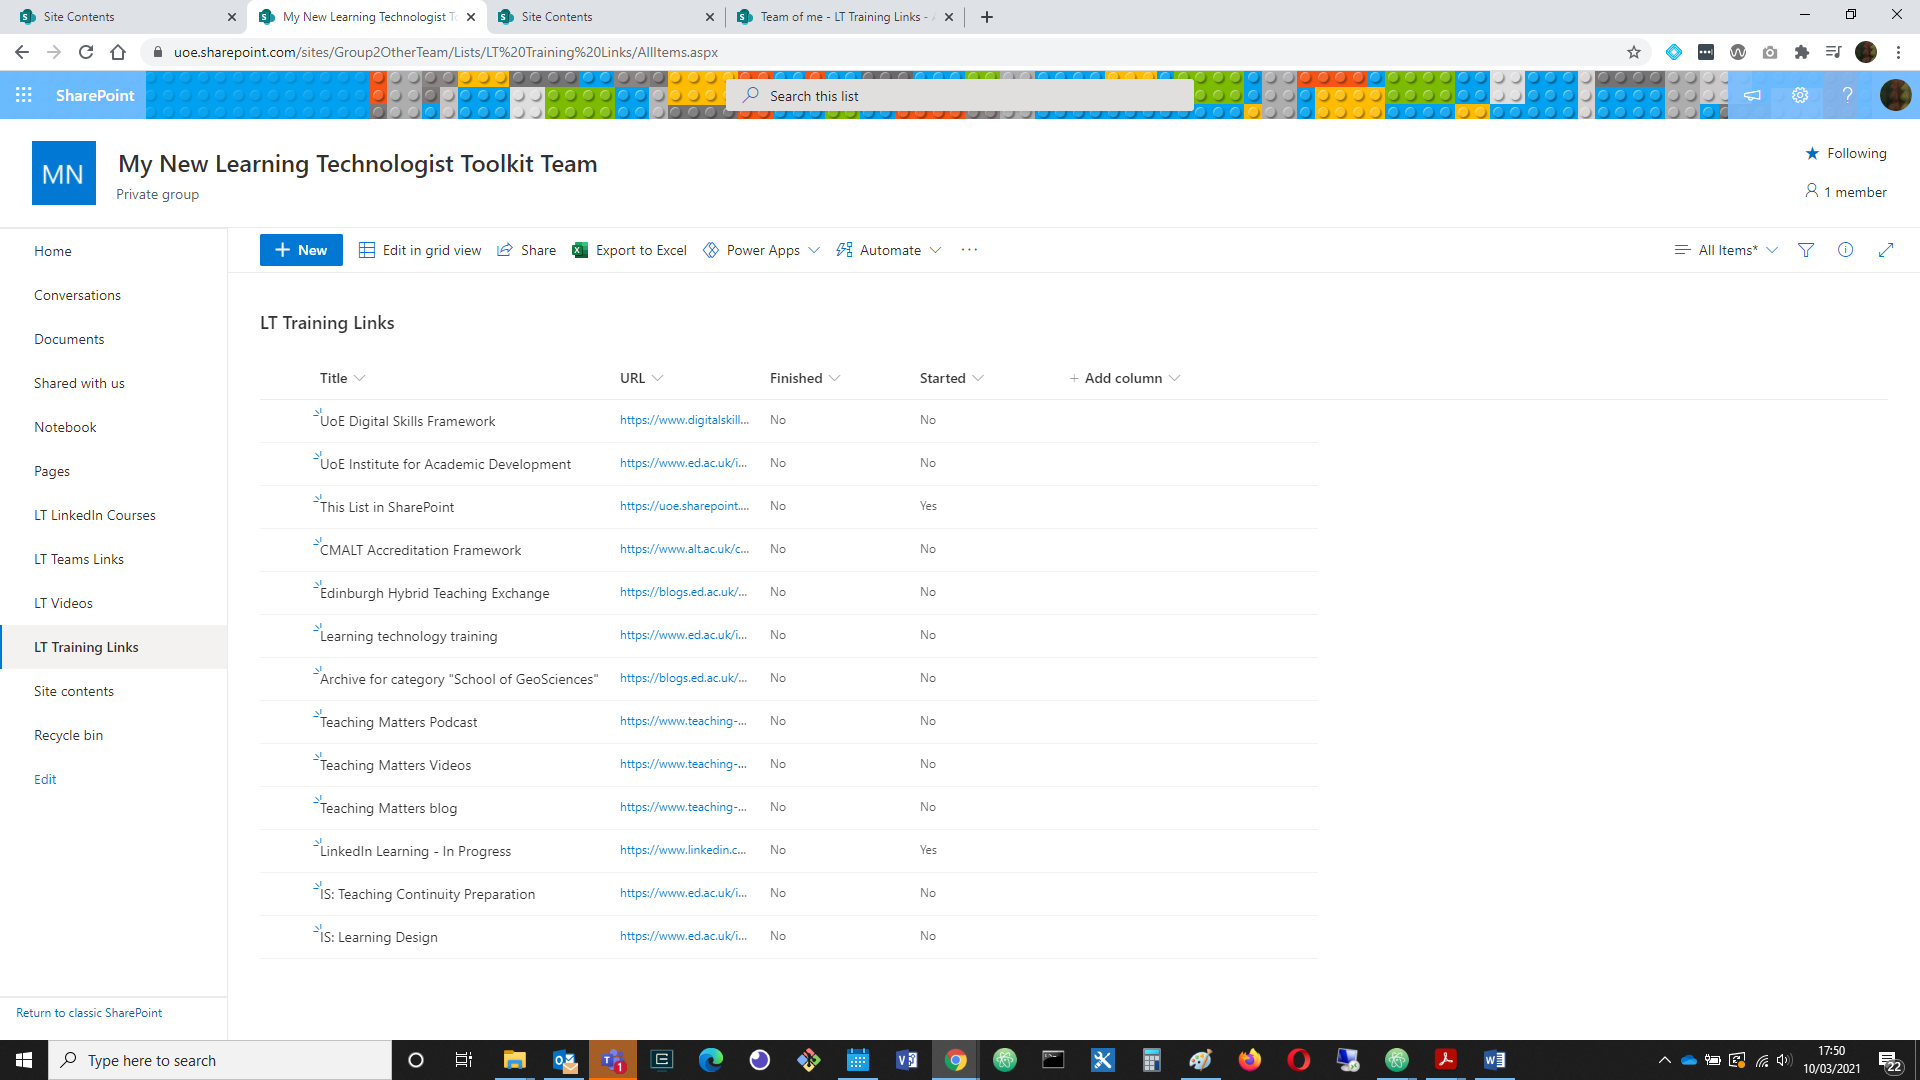 Screenshot: data pasted into the new list in SharePoint